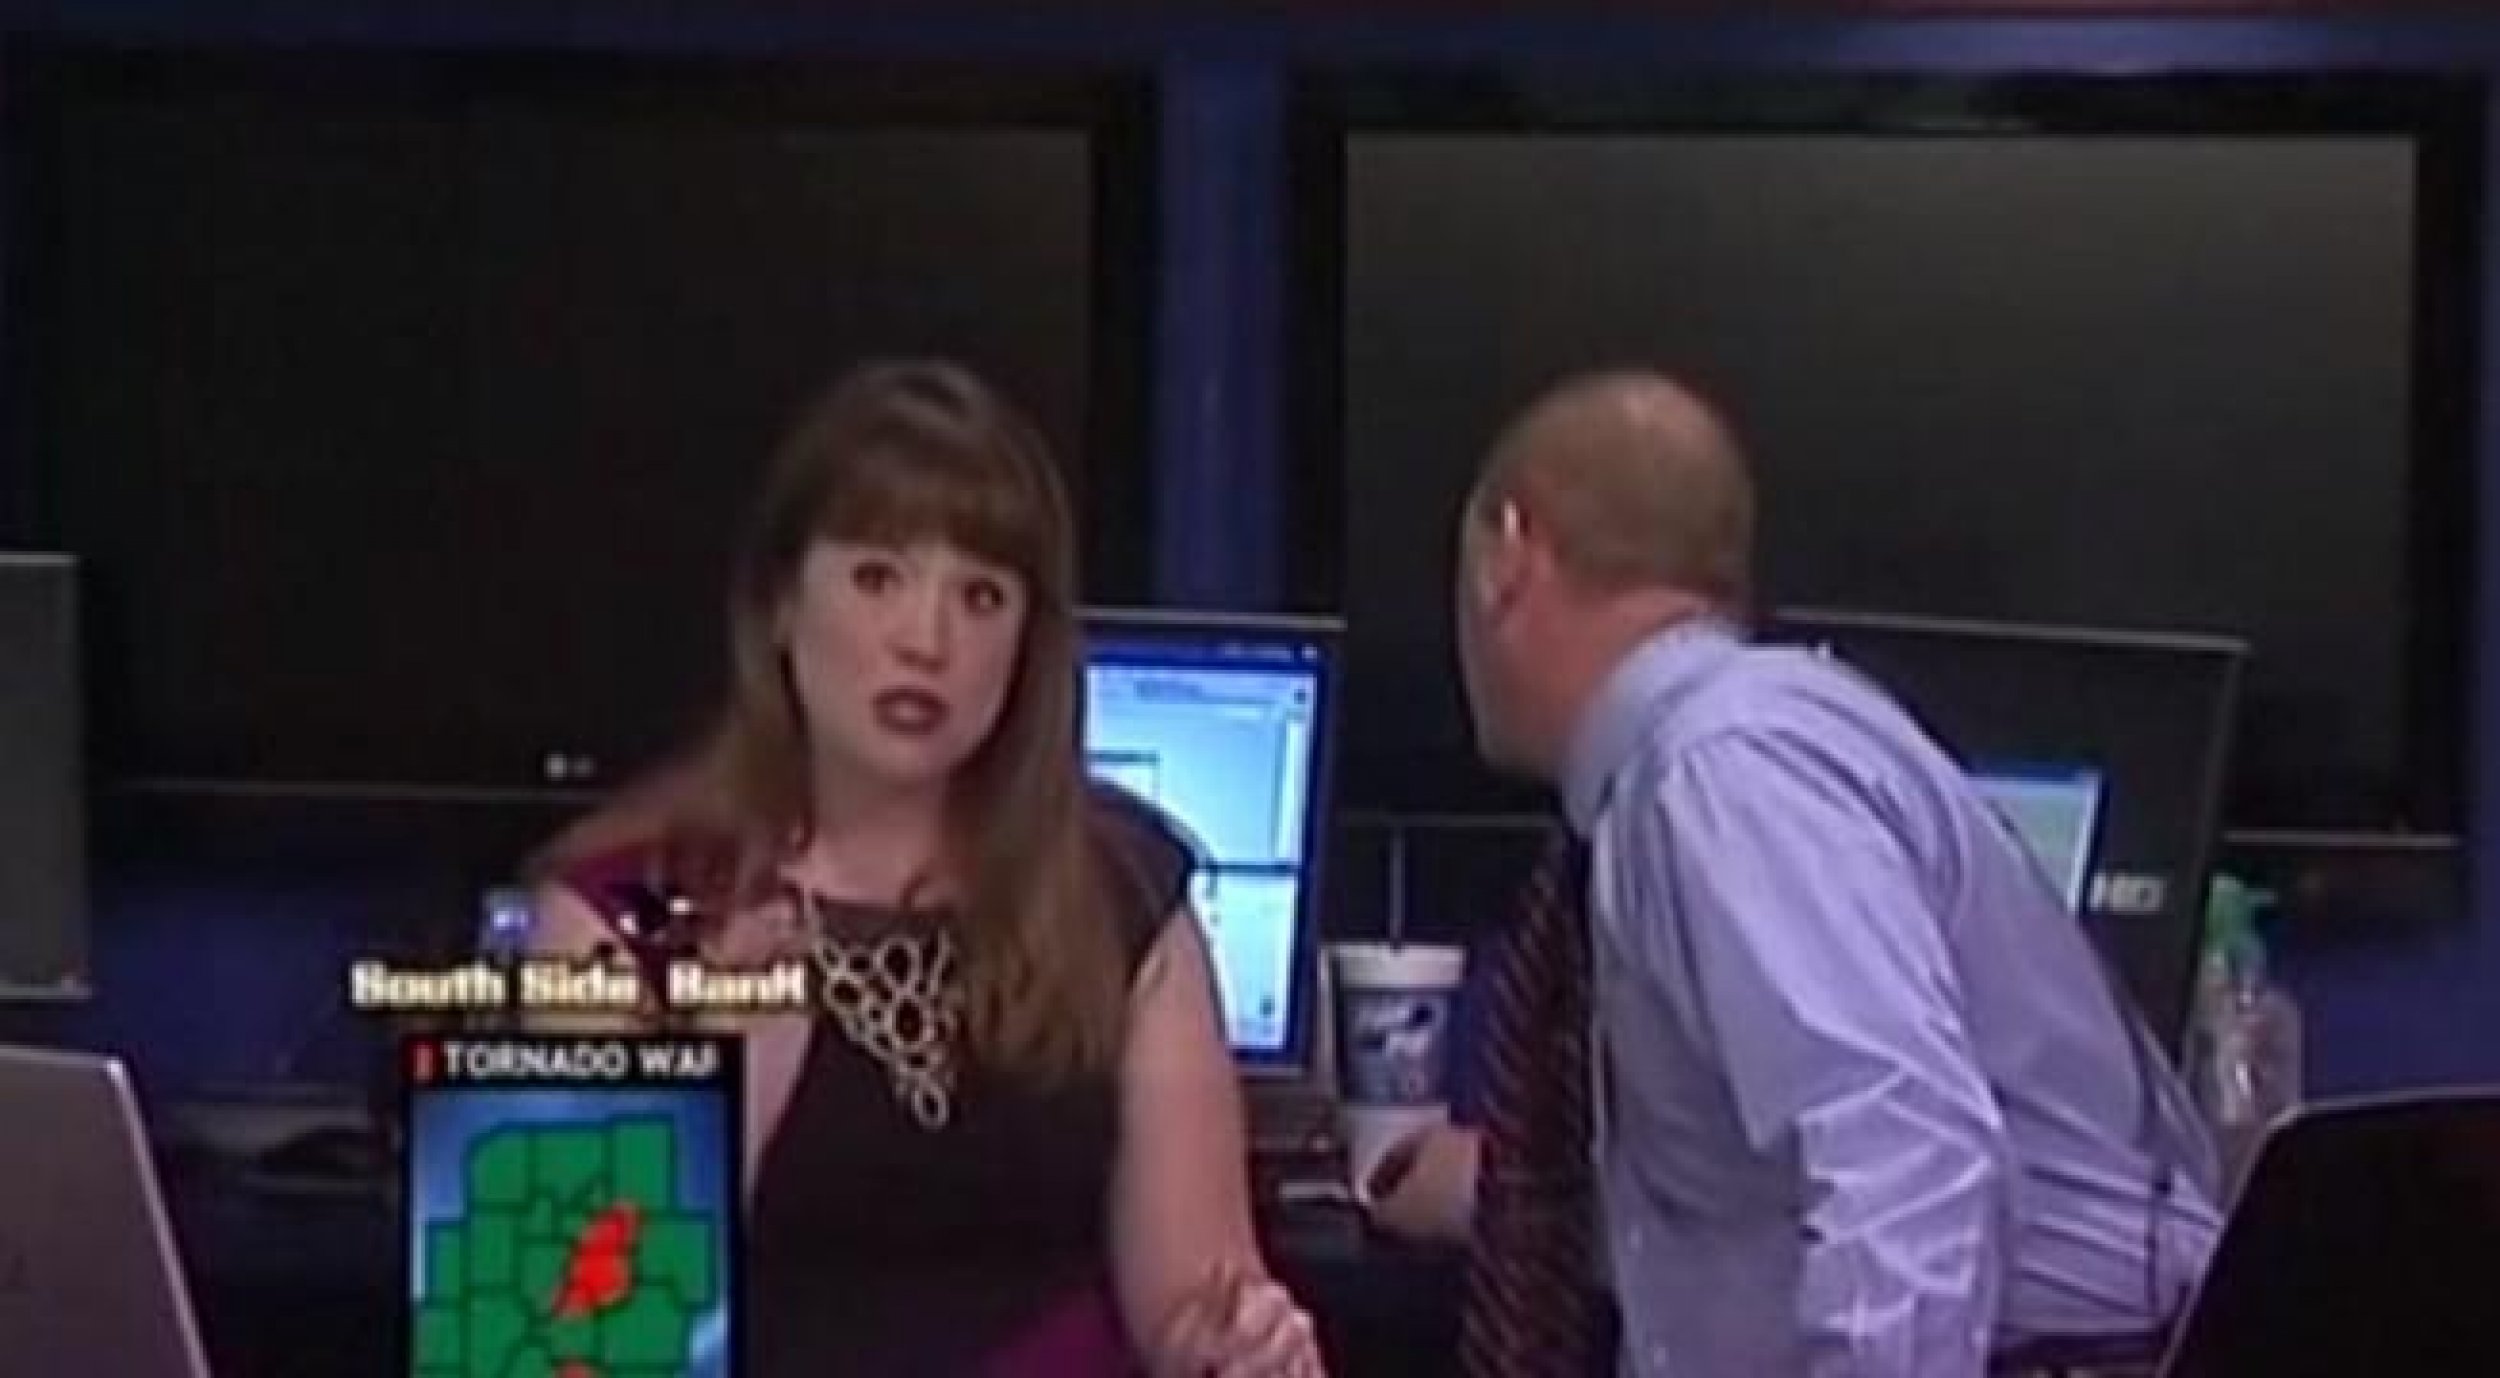 Lights, Camera, Tornado  Newscast Interrupted As Broadcasters Take Cover From Tornado